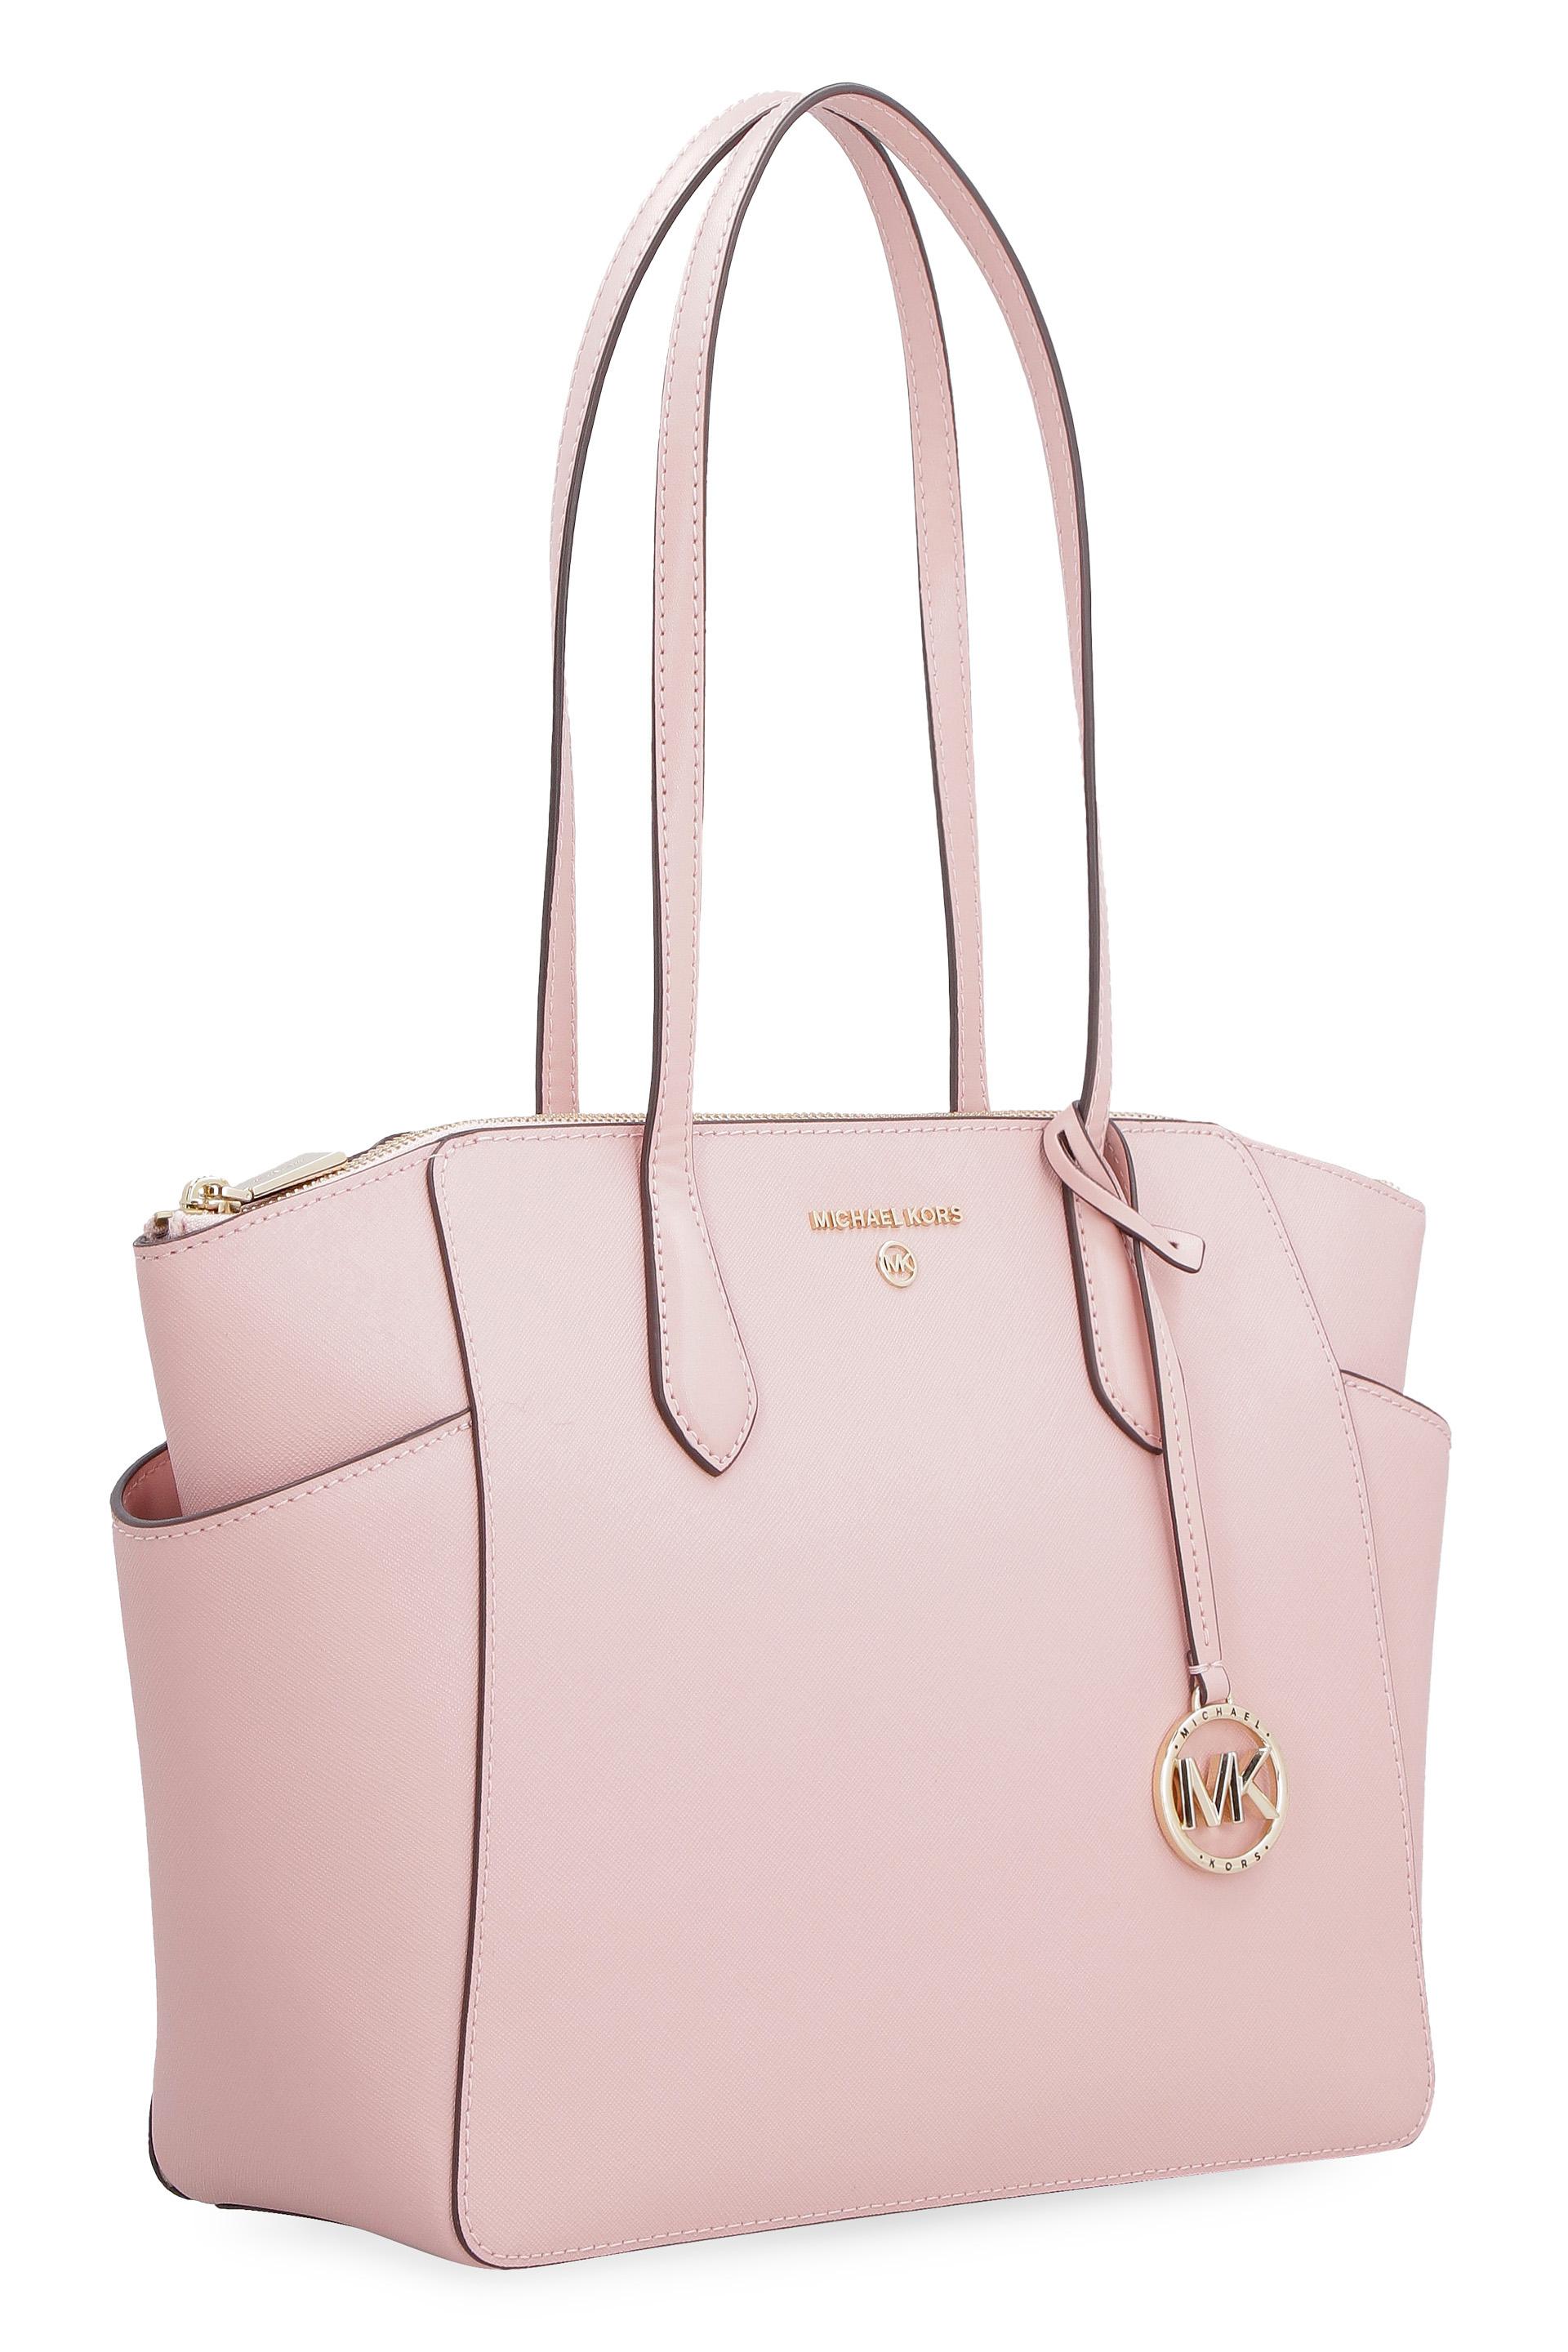 MICHAEL Michael Kors Marilyn Leather Tote in Pink | Lyst